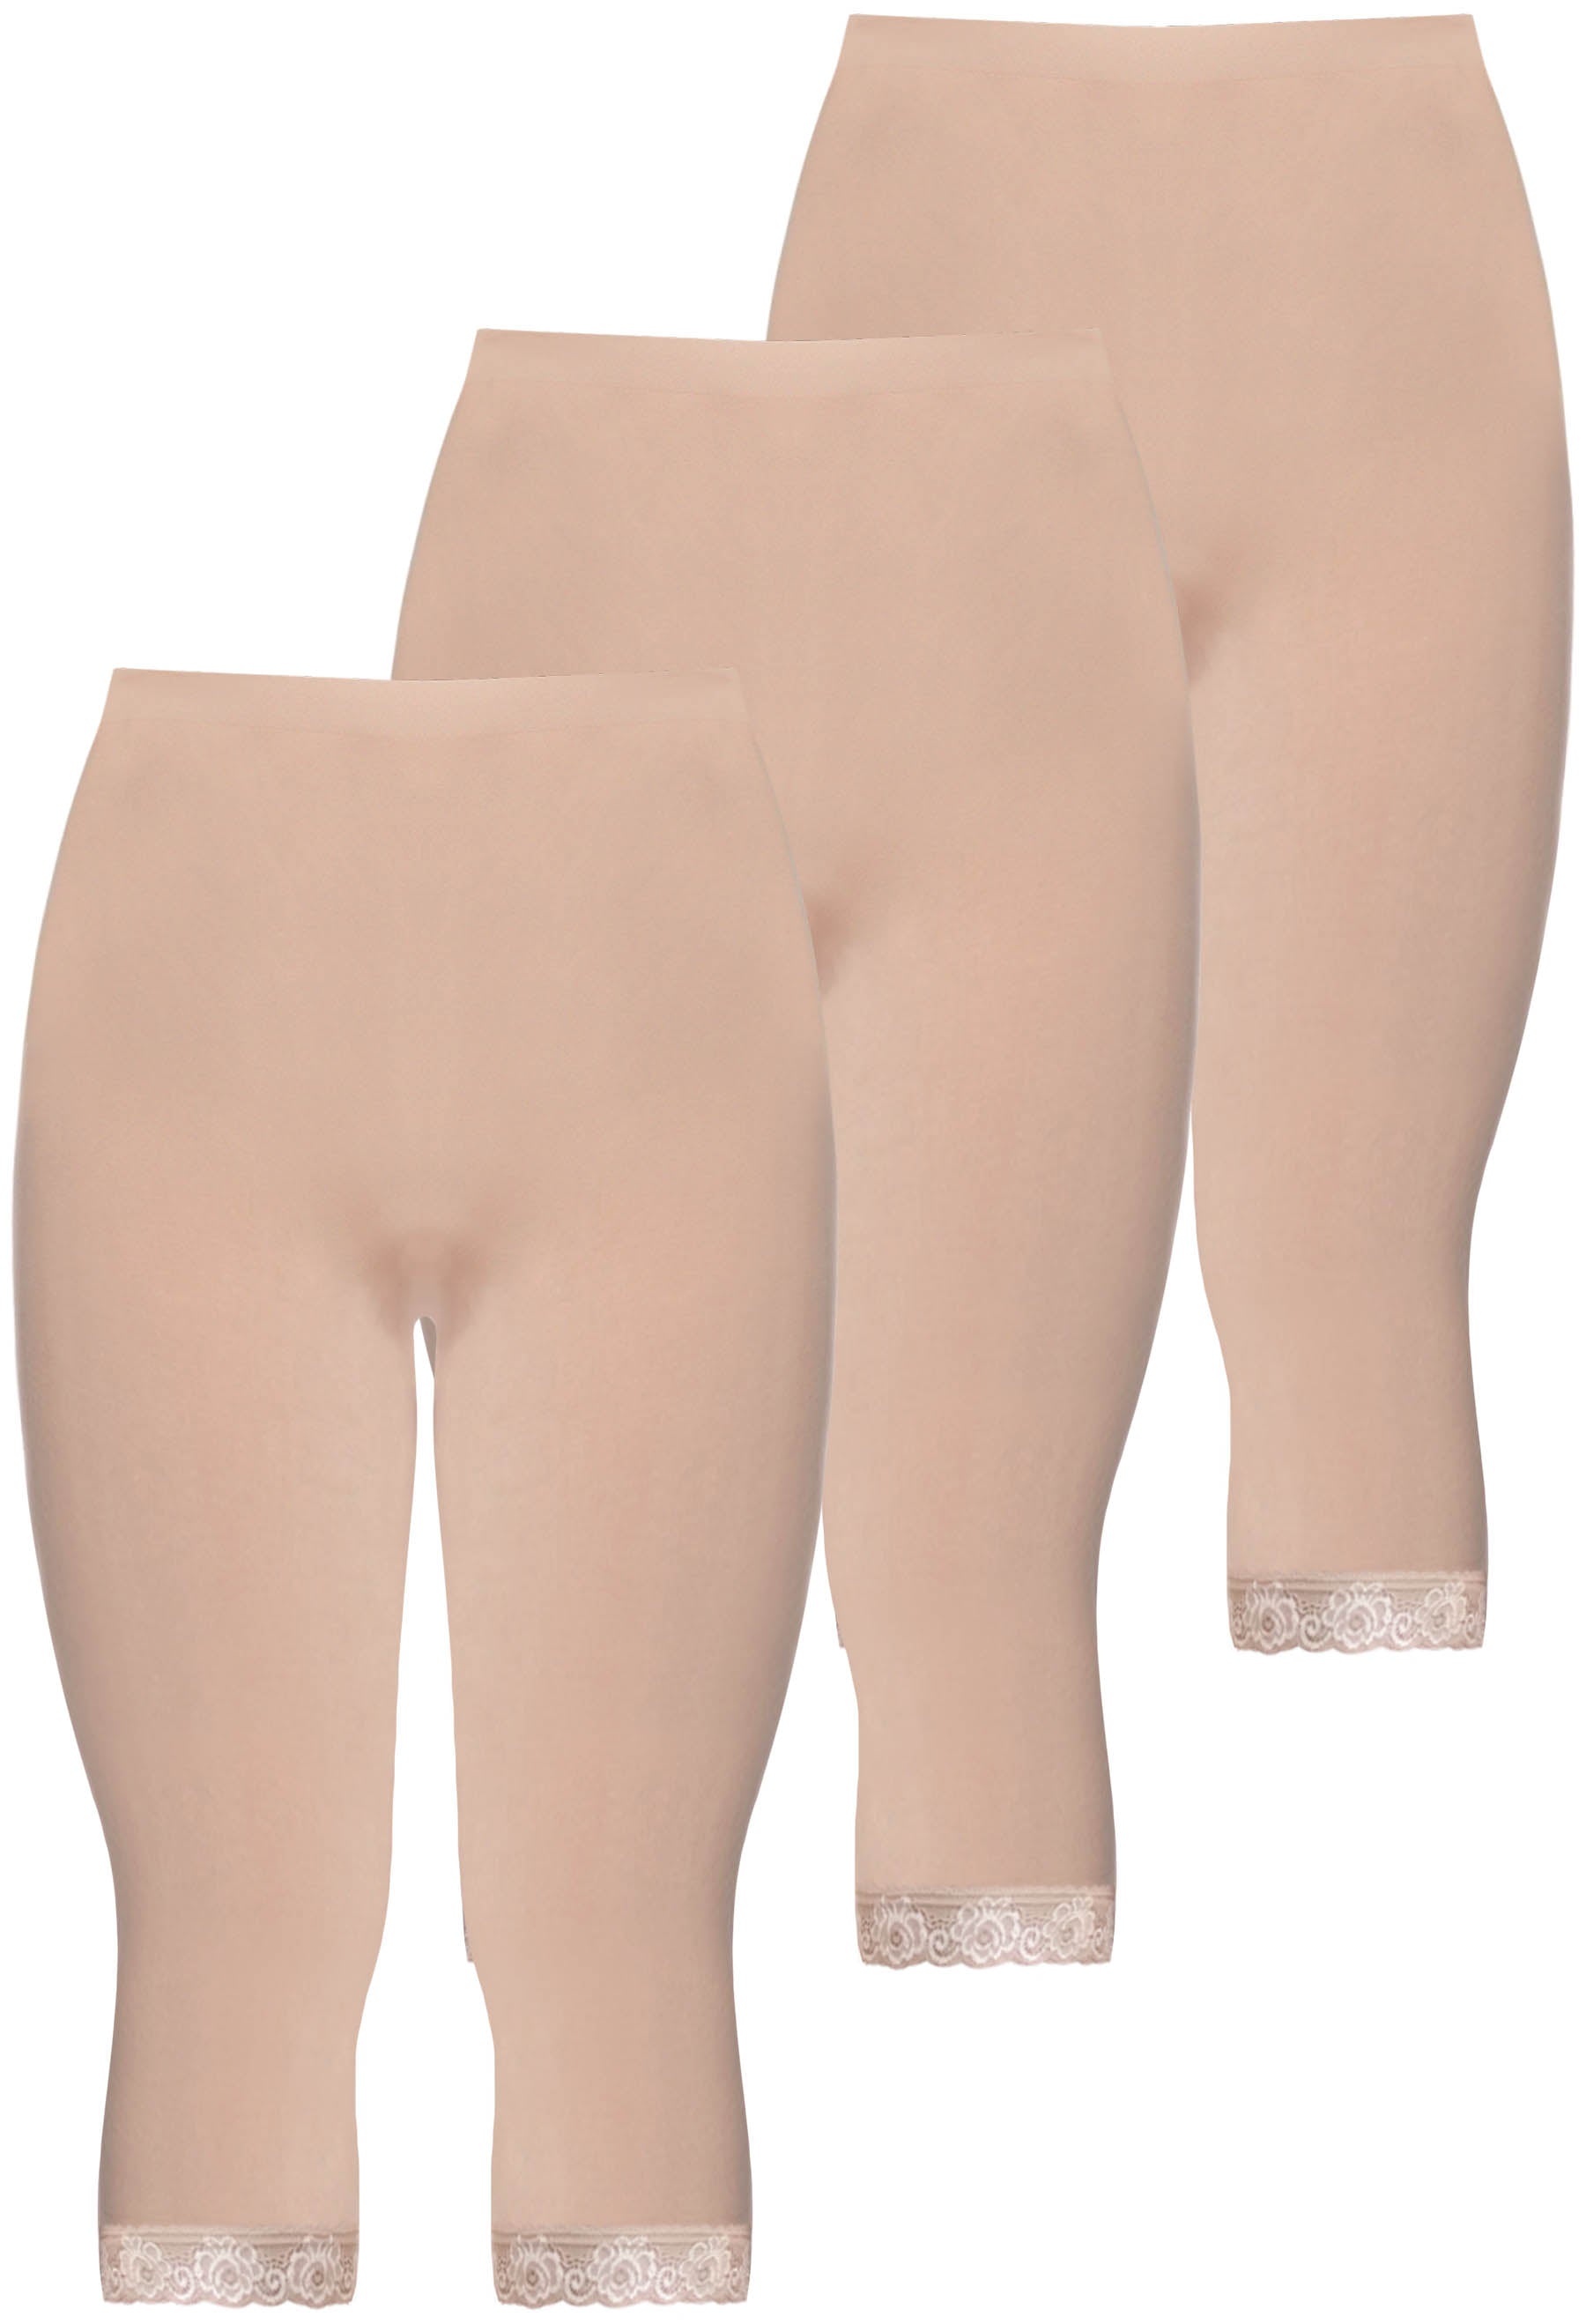 Anti Chafing High Rise 3/4 Cotton Leggings - 3 Pack